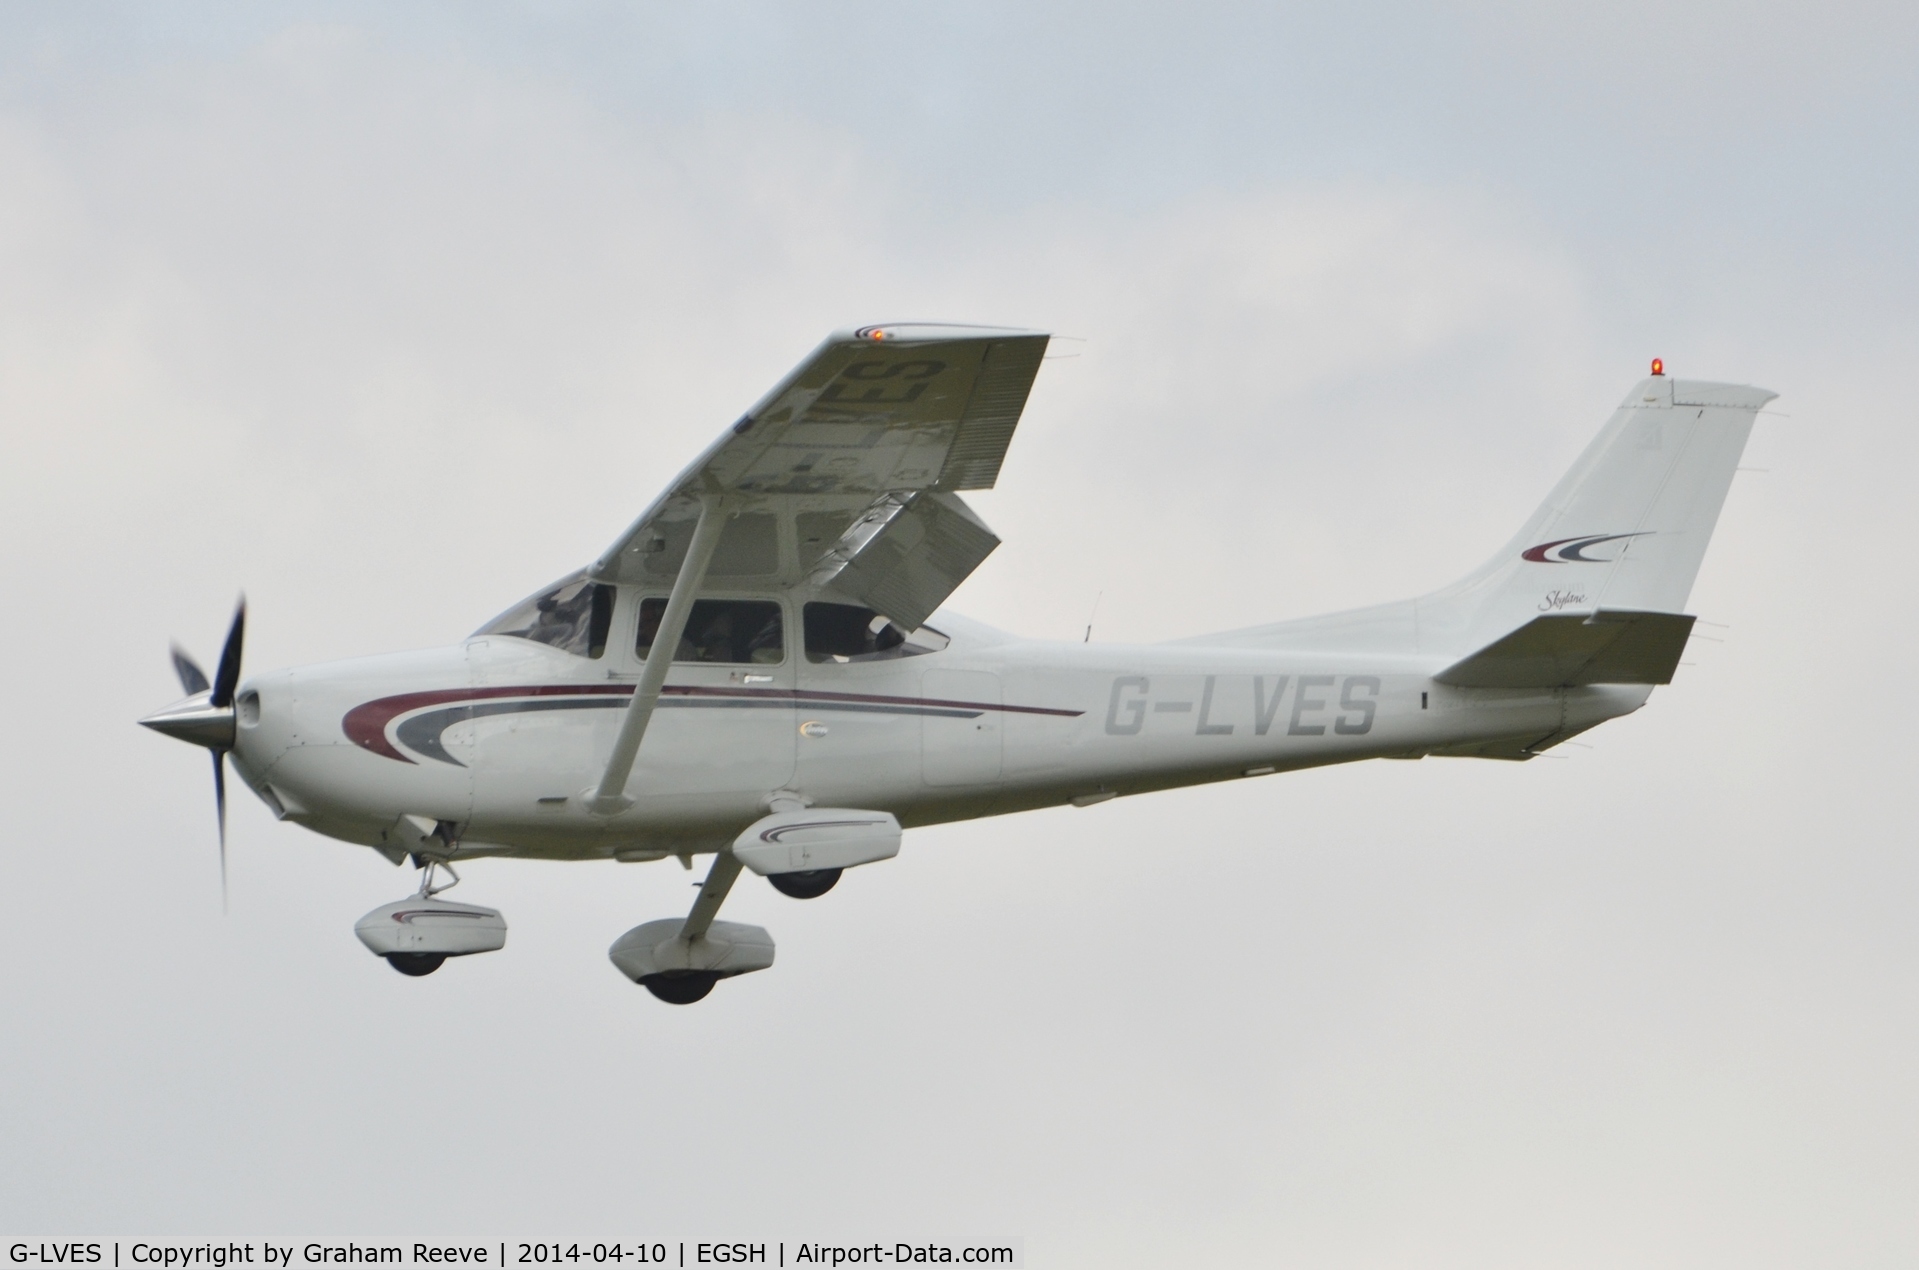 G-LVES, 2000 Cessna 182S Skylane C/N 182-80741, About to land at Norwich.